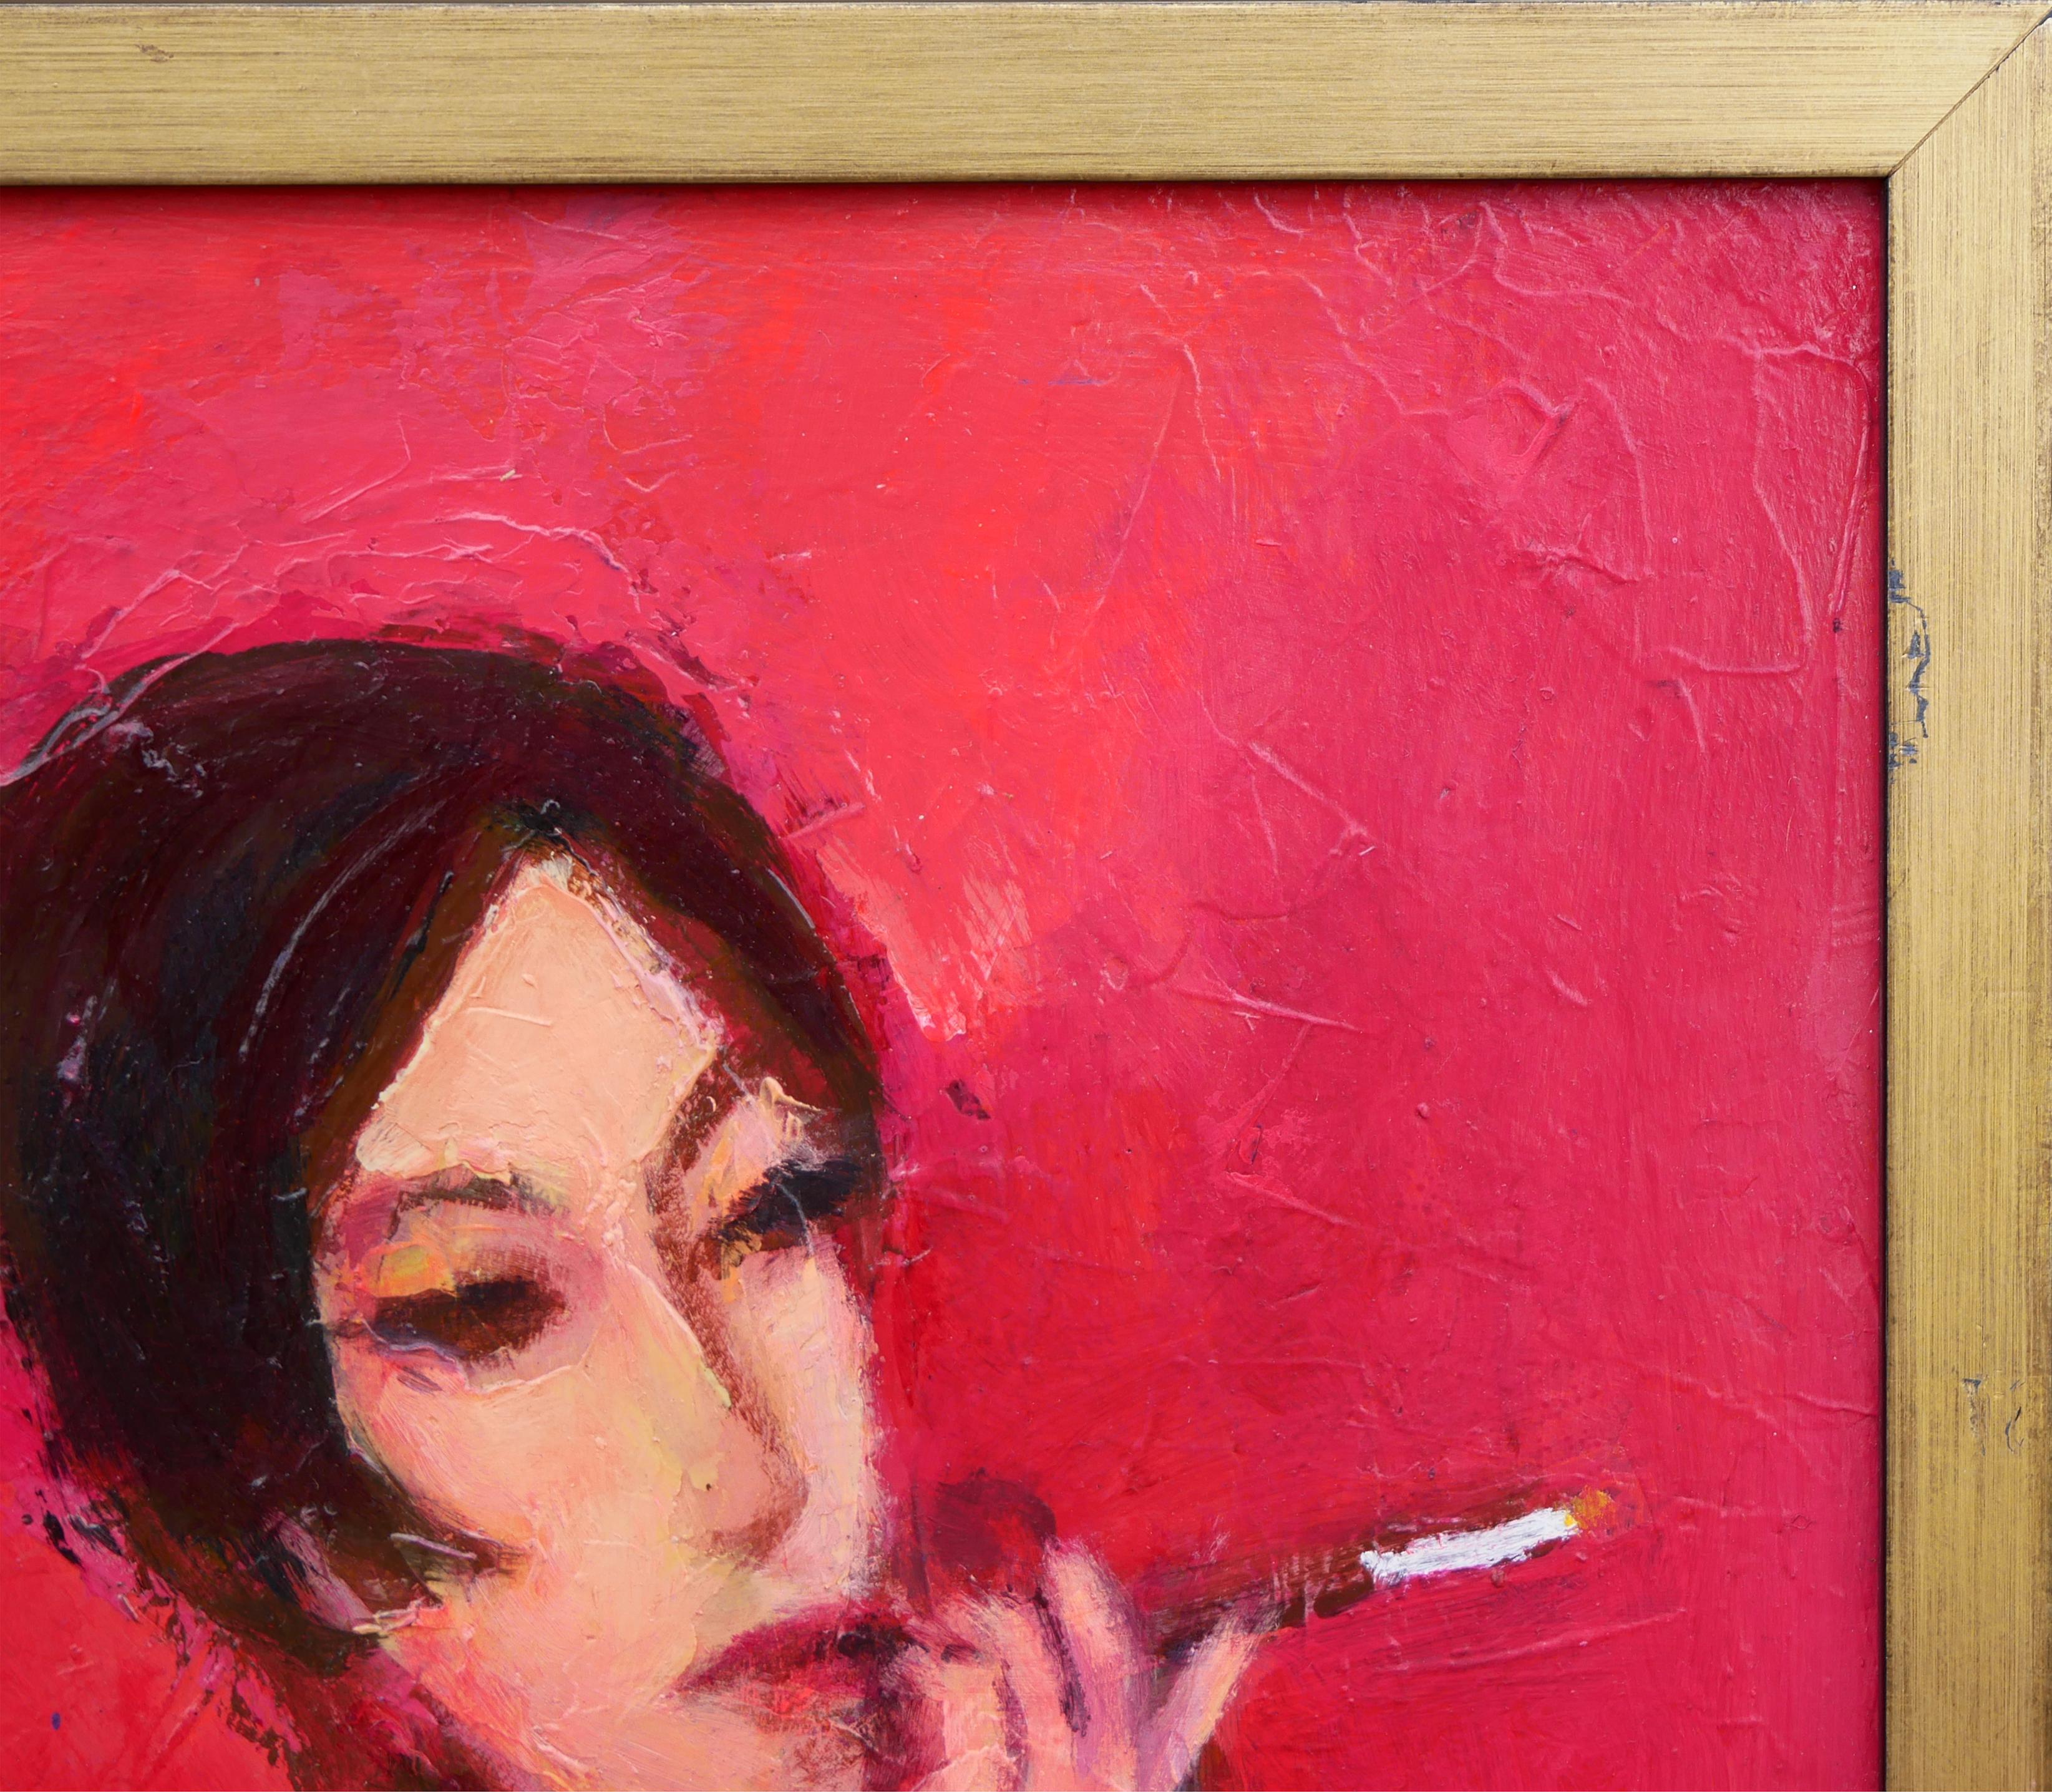 Red-toned abstract figurative portrait painting by Houston, TX artist David Adickes. The painting depicts a woman smoking and drinking wine by a small side table. Unsigned. Framed in a gold wooden frame.

Dimensions Without Frame: H 22.5 in. x W